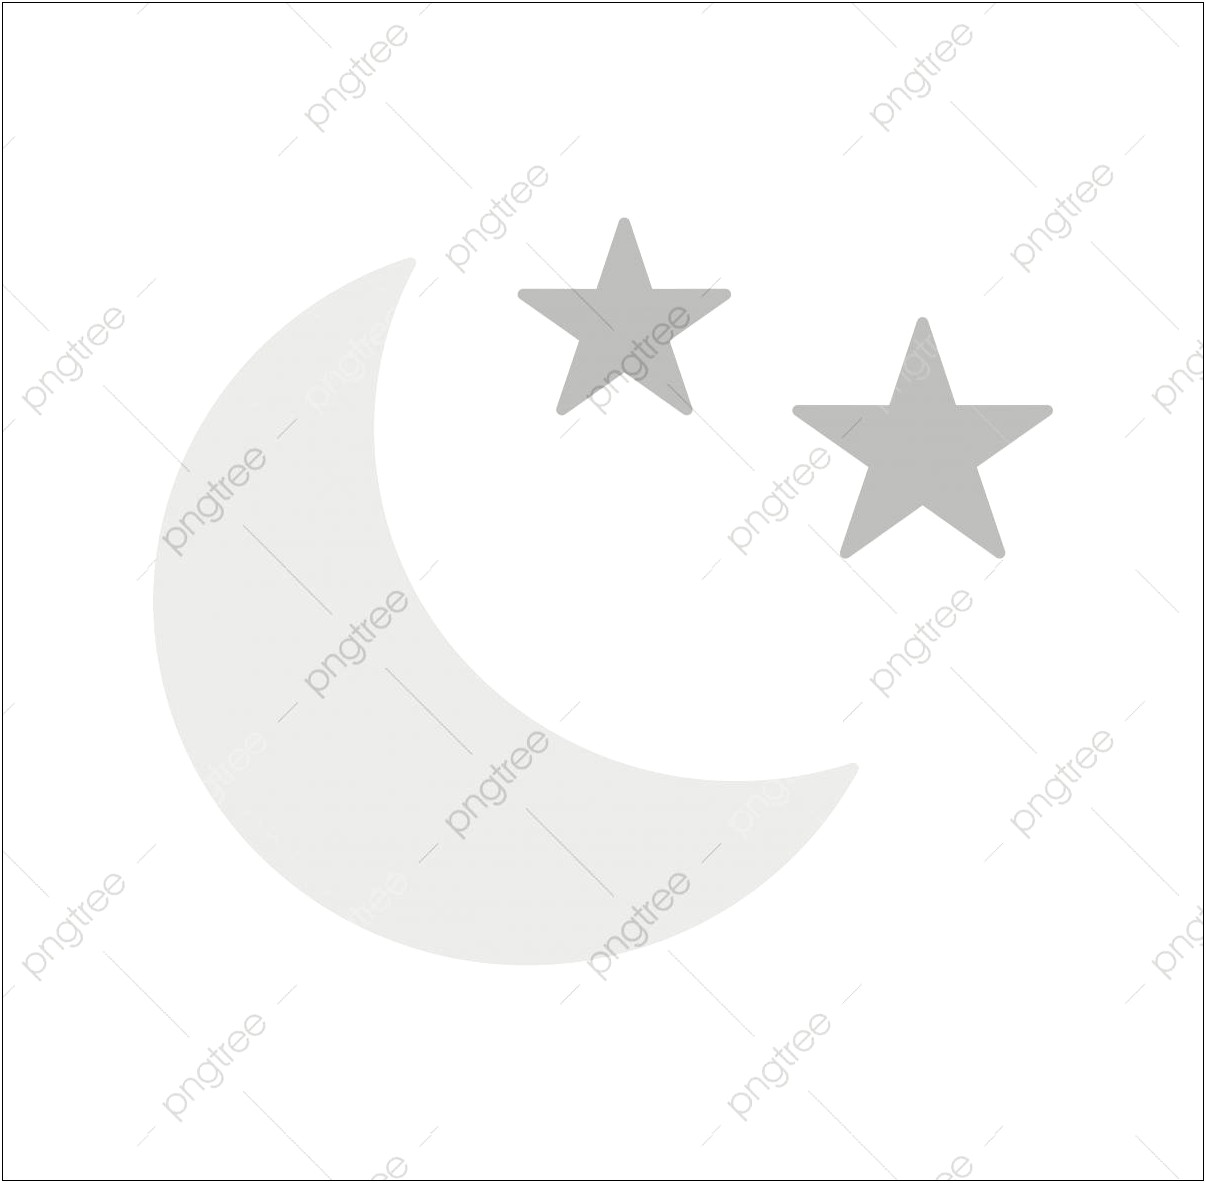 Free Crescent Moon And Star Template